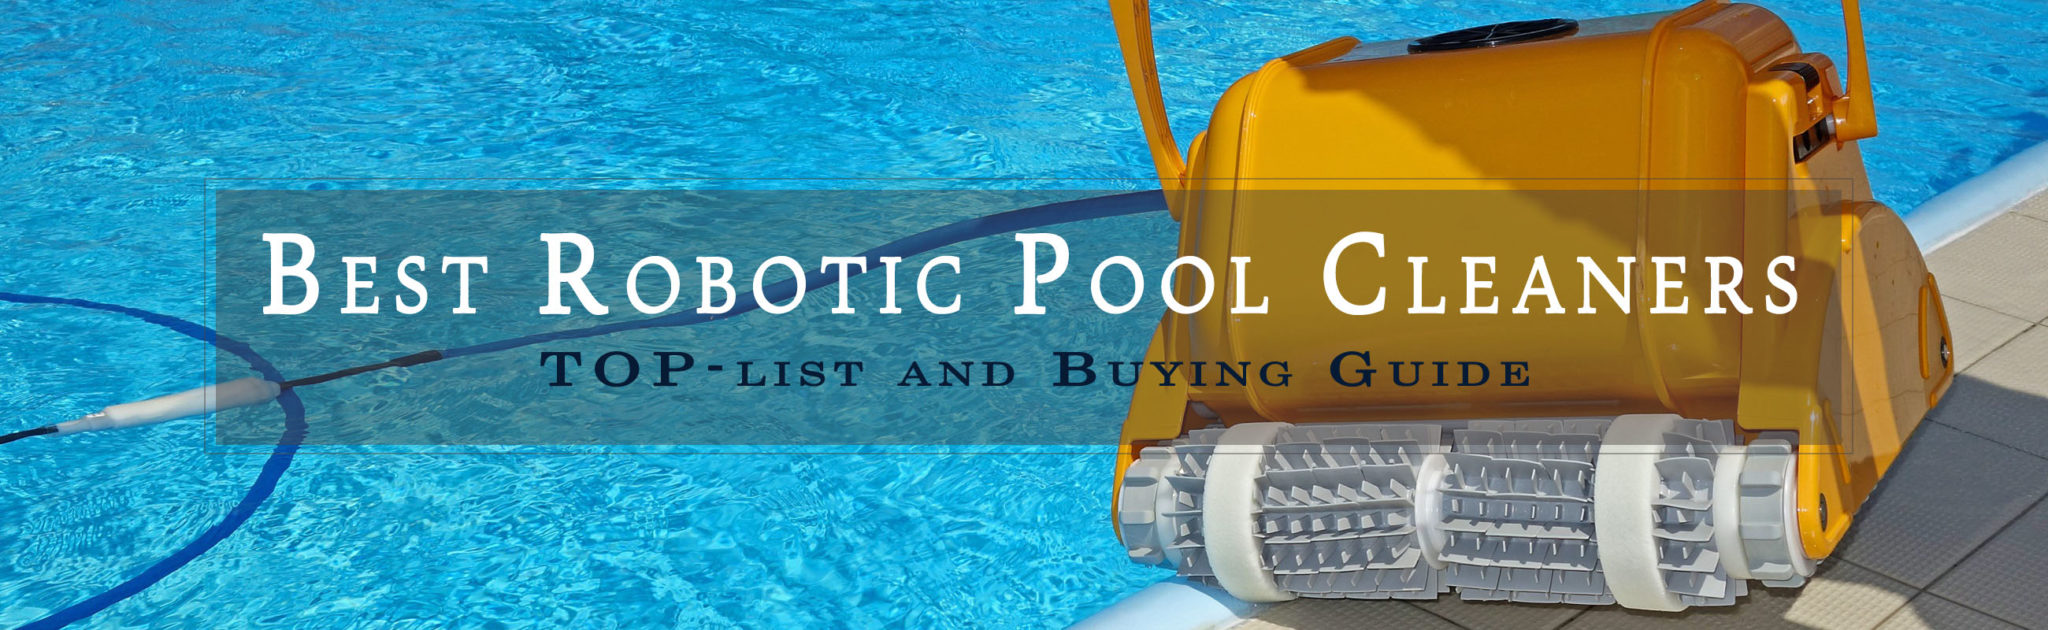 Best robotic pool cleaners